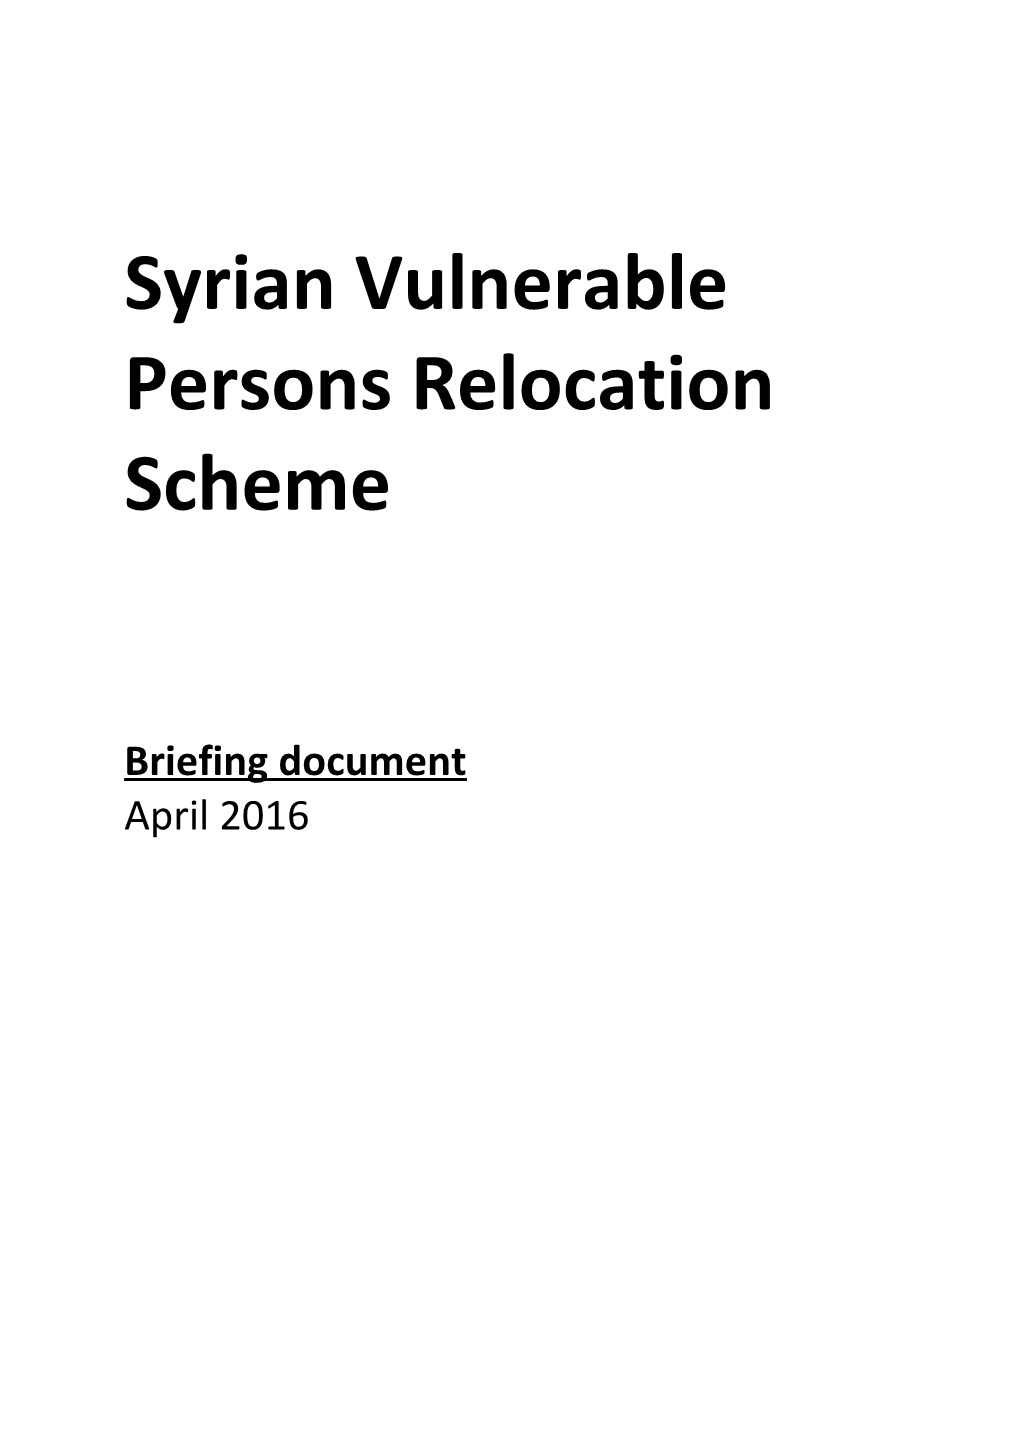 Syrian Vulnerable Persons Relocation Scheme